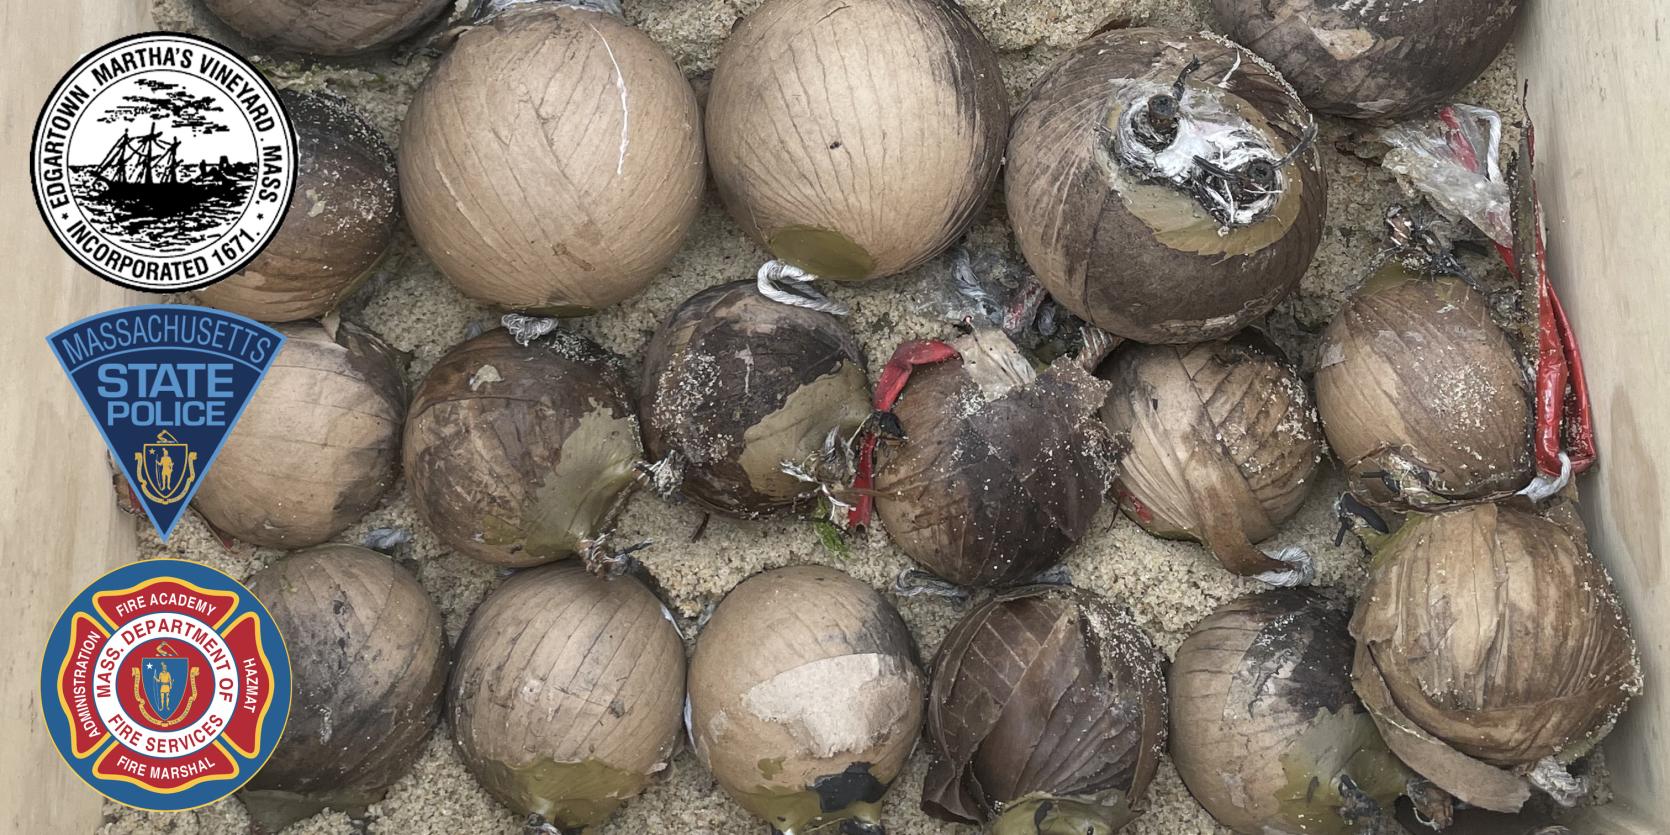 Picture of unexploded fireworks shells